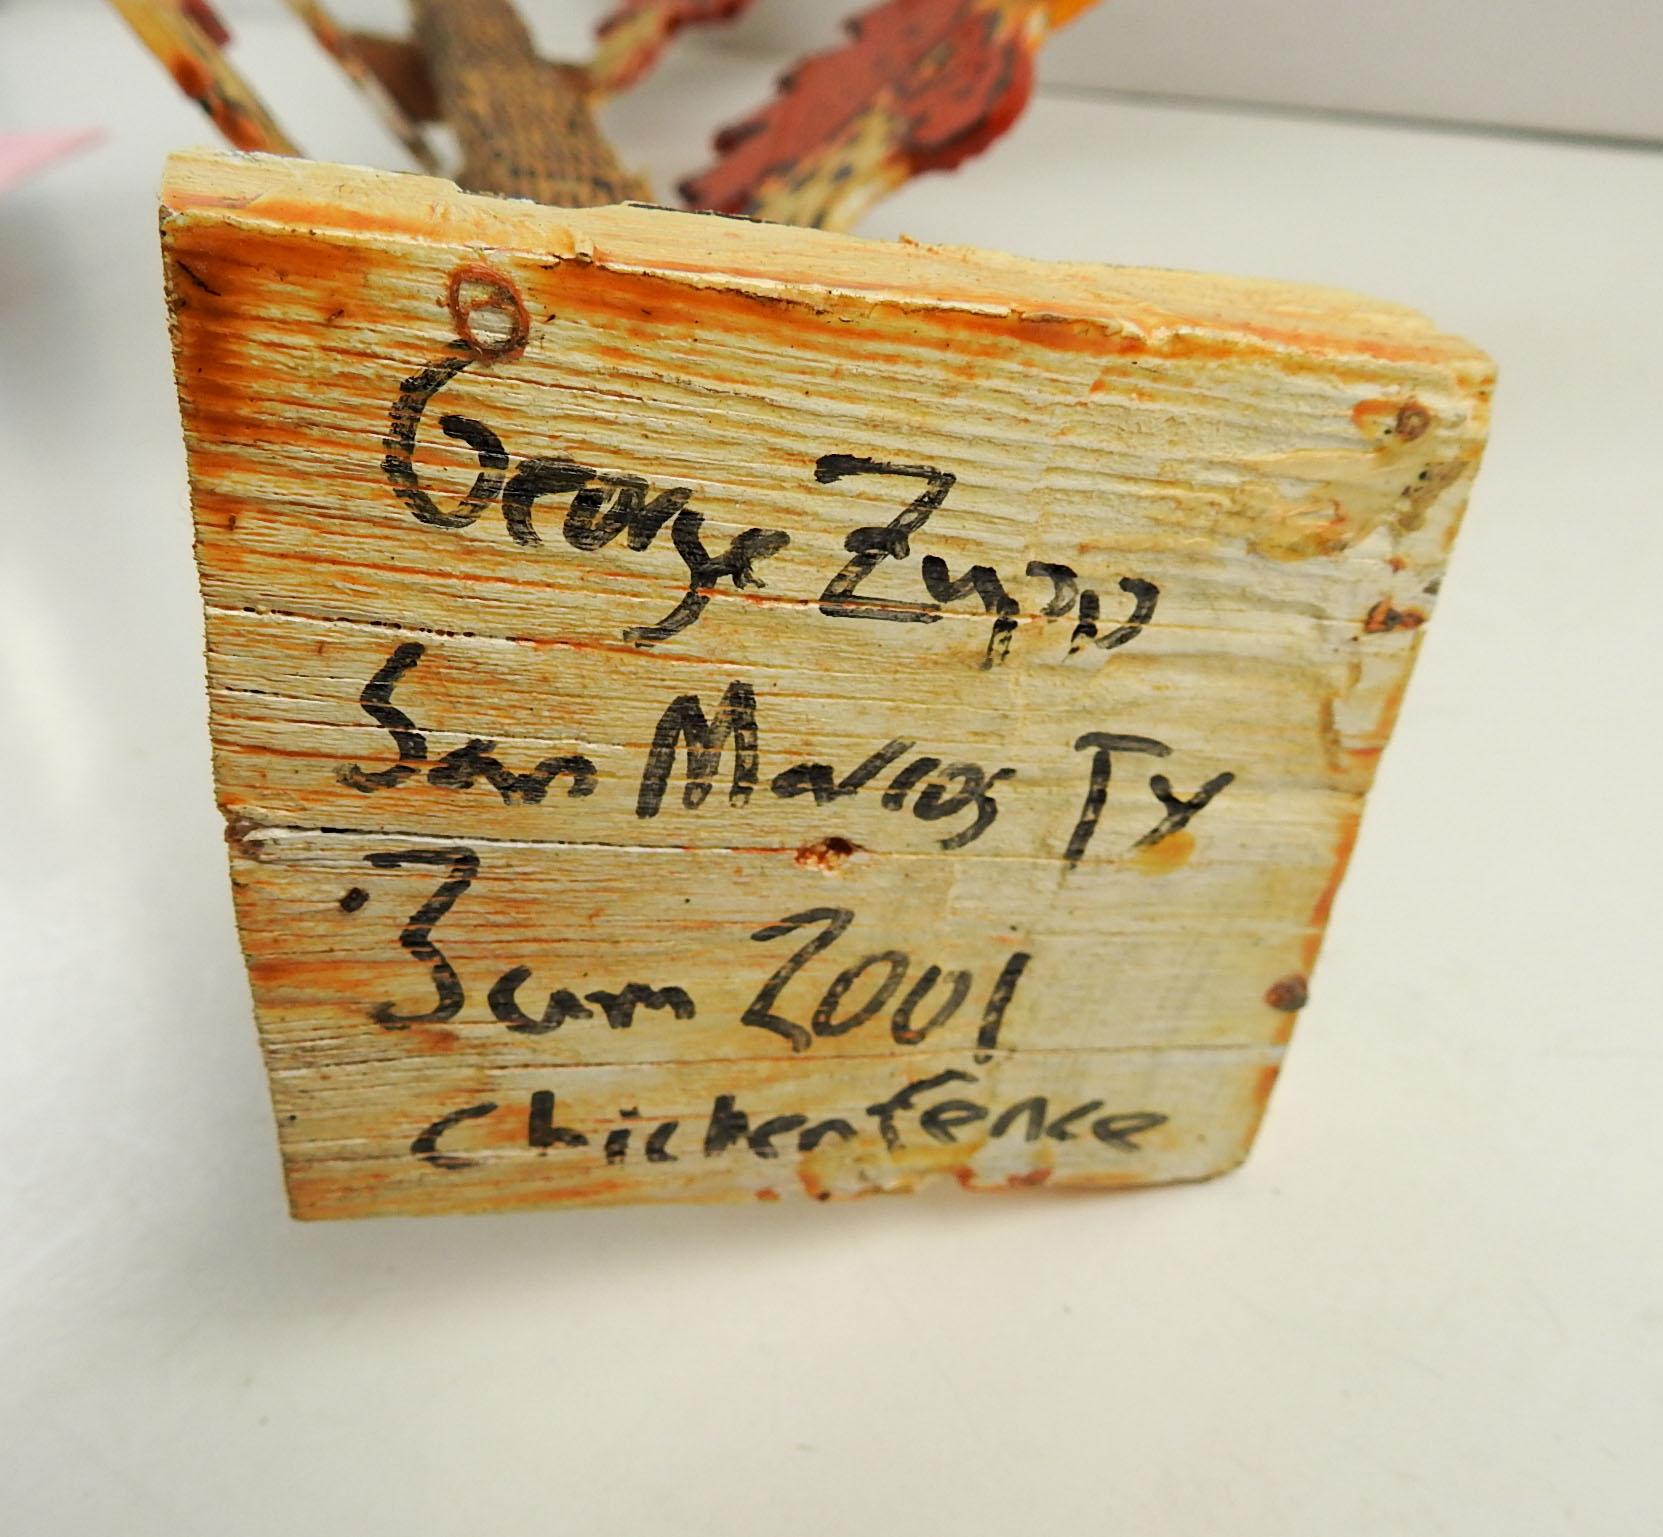 Carved and painted wood sculpture by Texas artist George Zupp AKA Chicken George. Signed, titled 